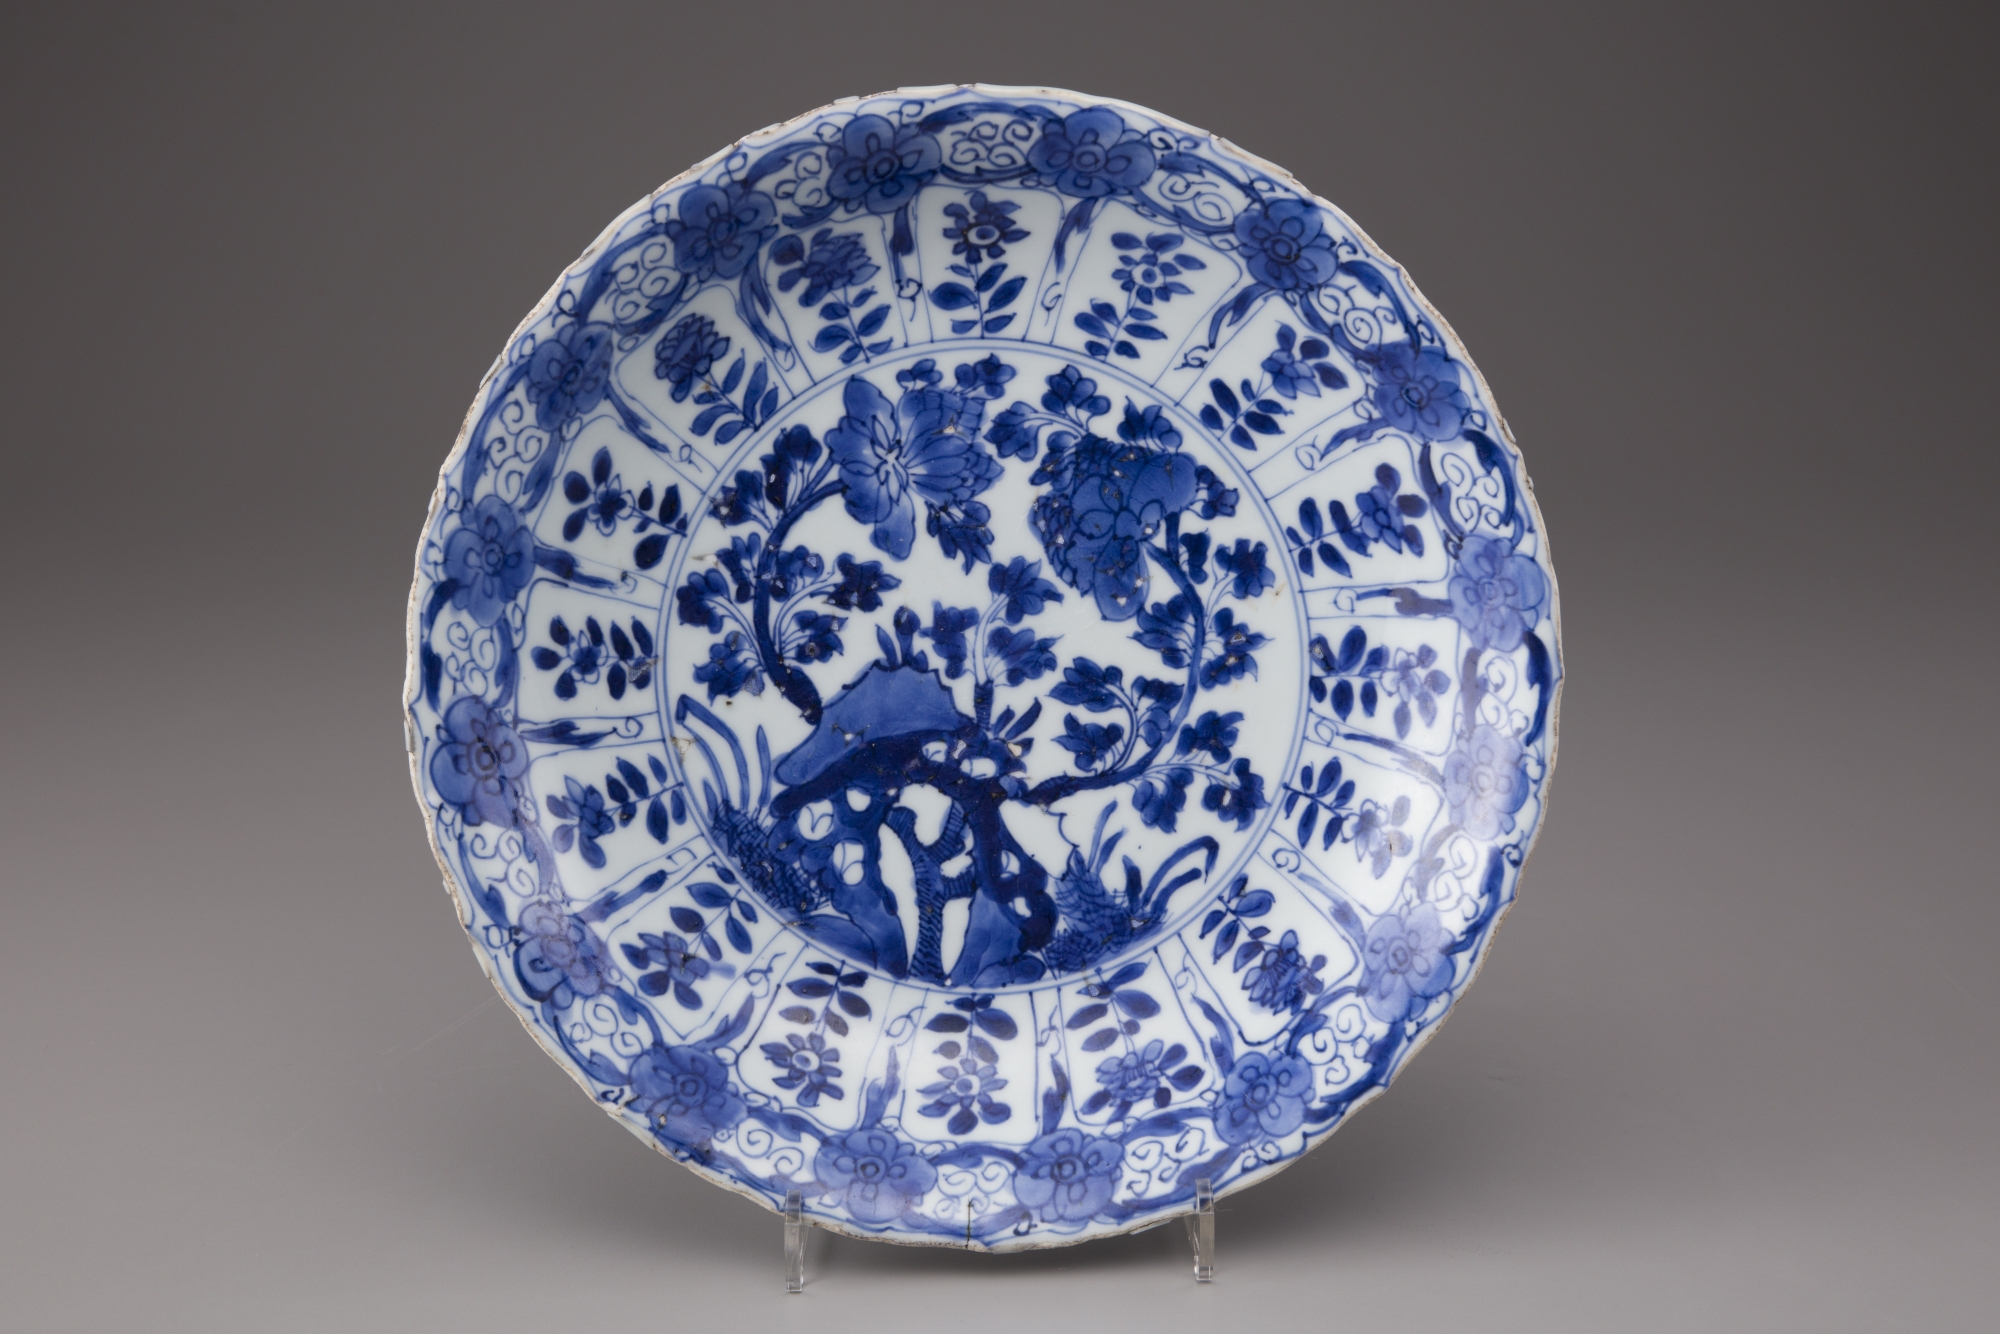 A blue and white porcelain plate with floral decorations | OAA